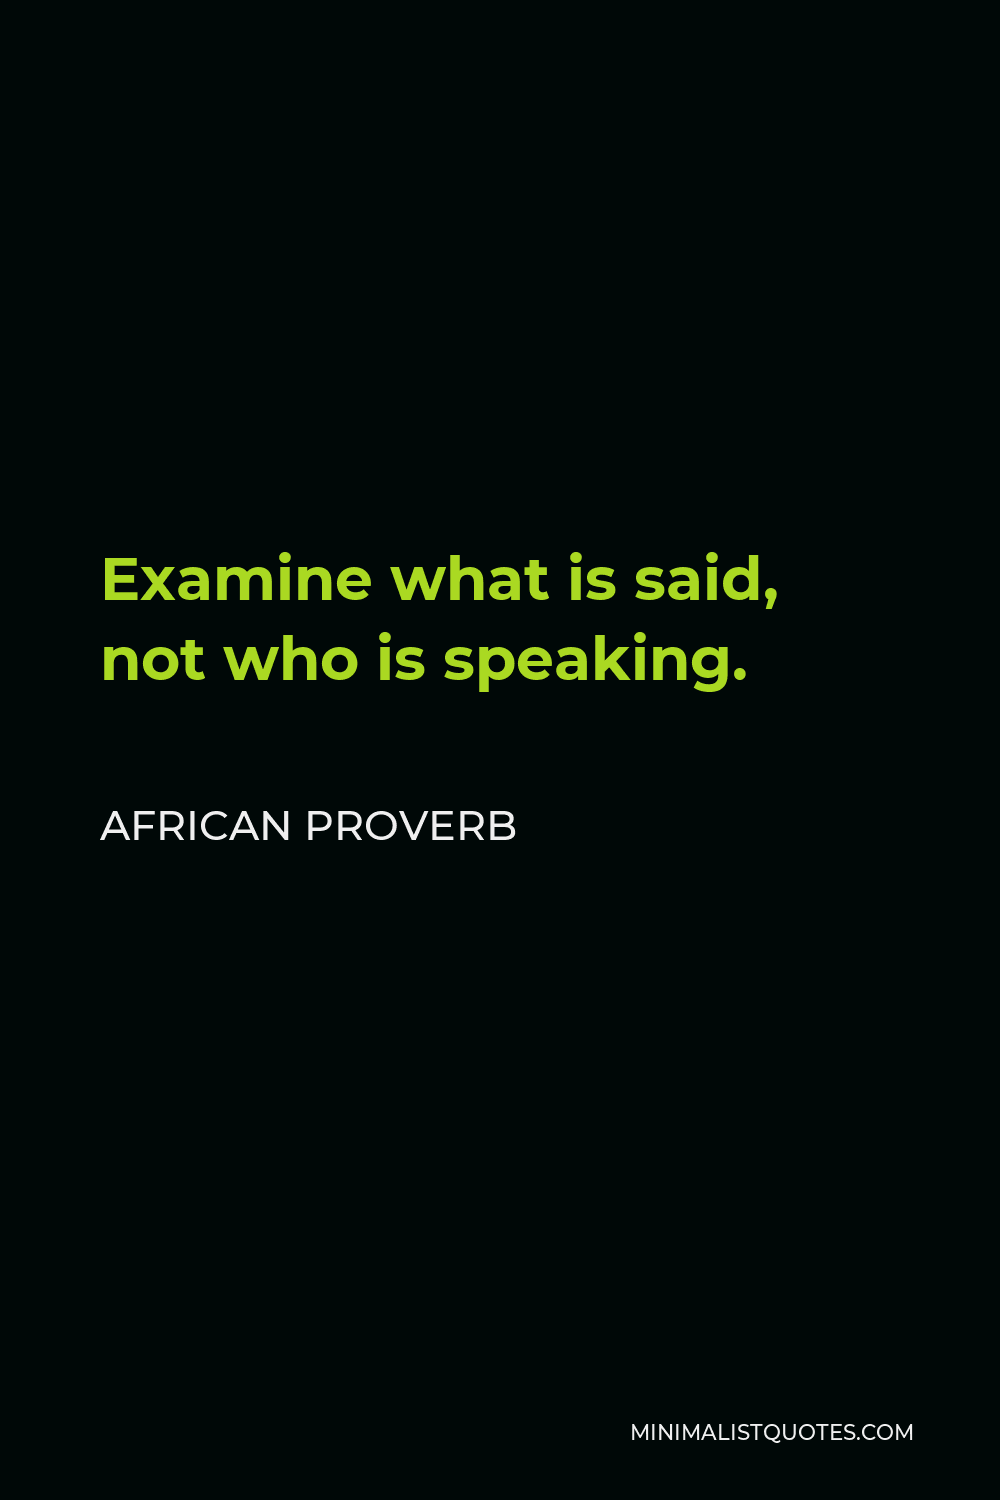 African Proverb Quote - Examine what is said, not who is speaking.